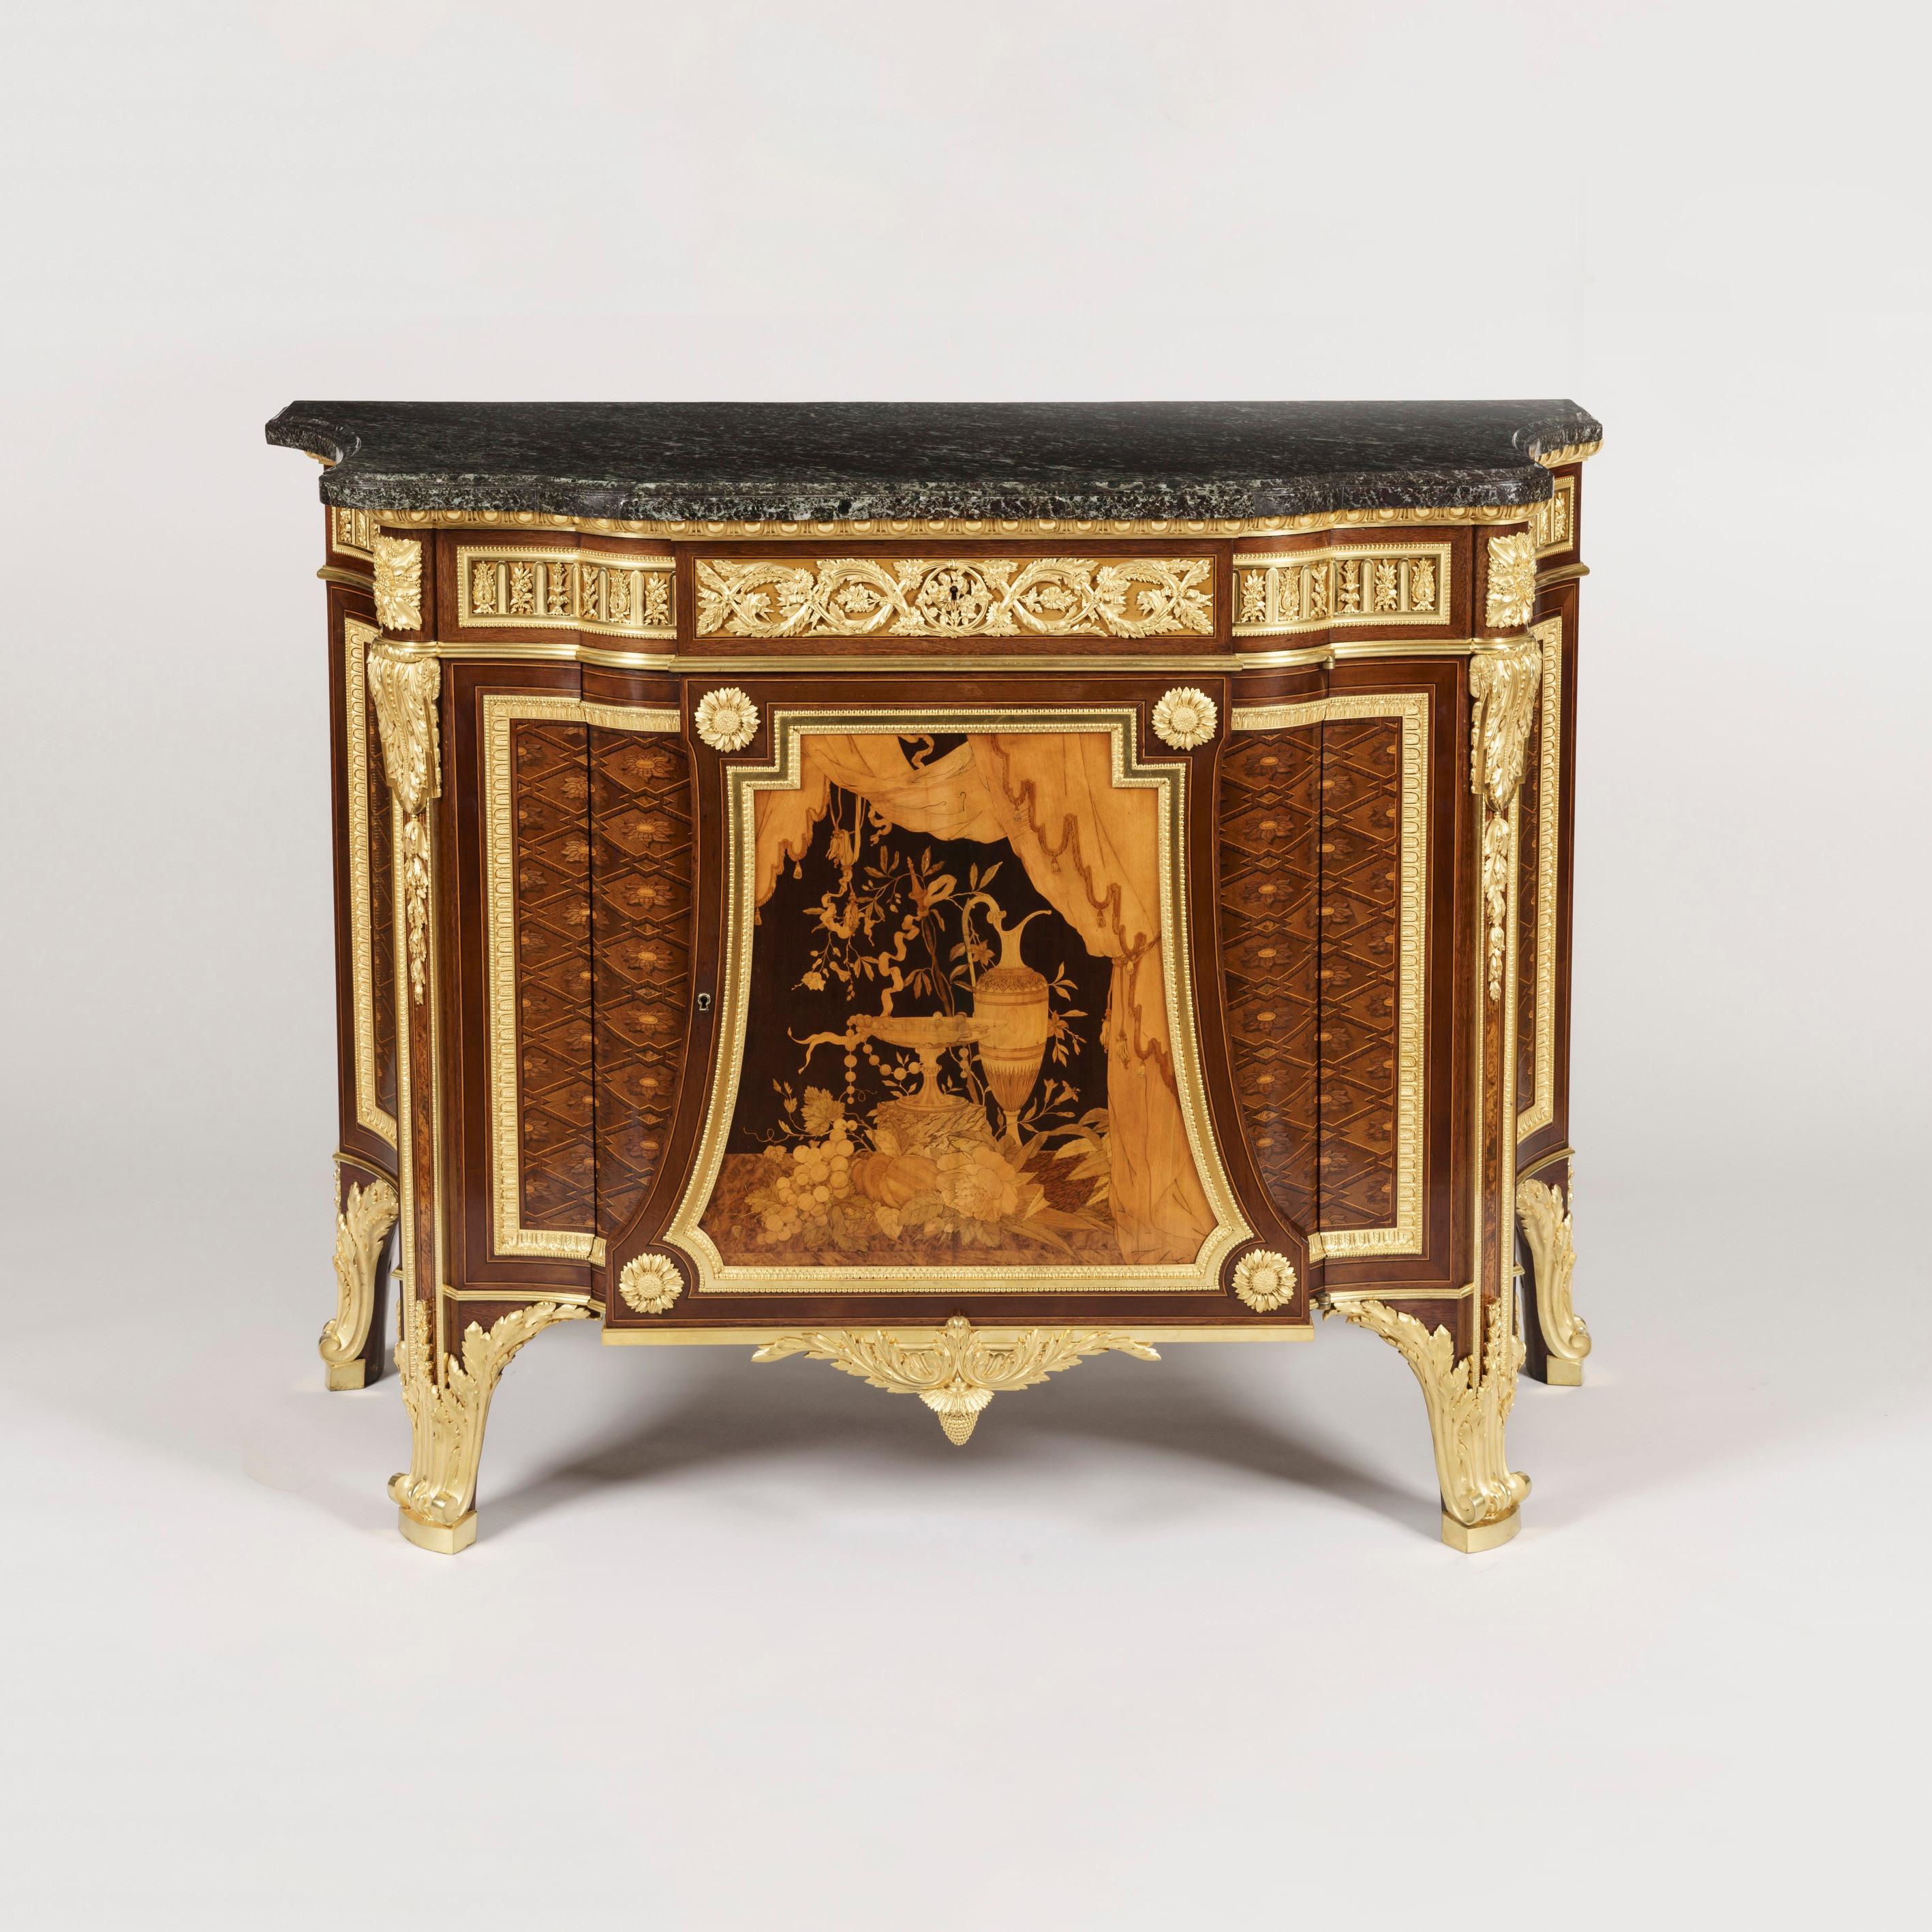 A very fine Louis XVI style gilt bronze-mounted marquetry commode
By Charles Guillaume Winckelsen 

After a model by Jean-Henri Riesener, supplied to Marie-Antoinette for Versailles. Constructed in a finely patinated harewood, with a saint-Anne